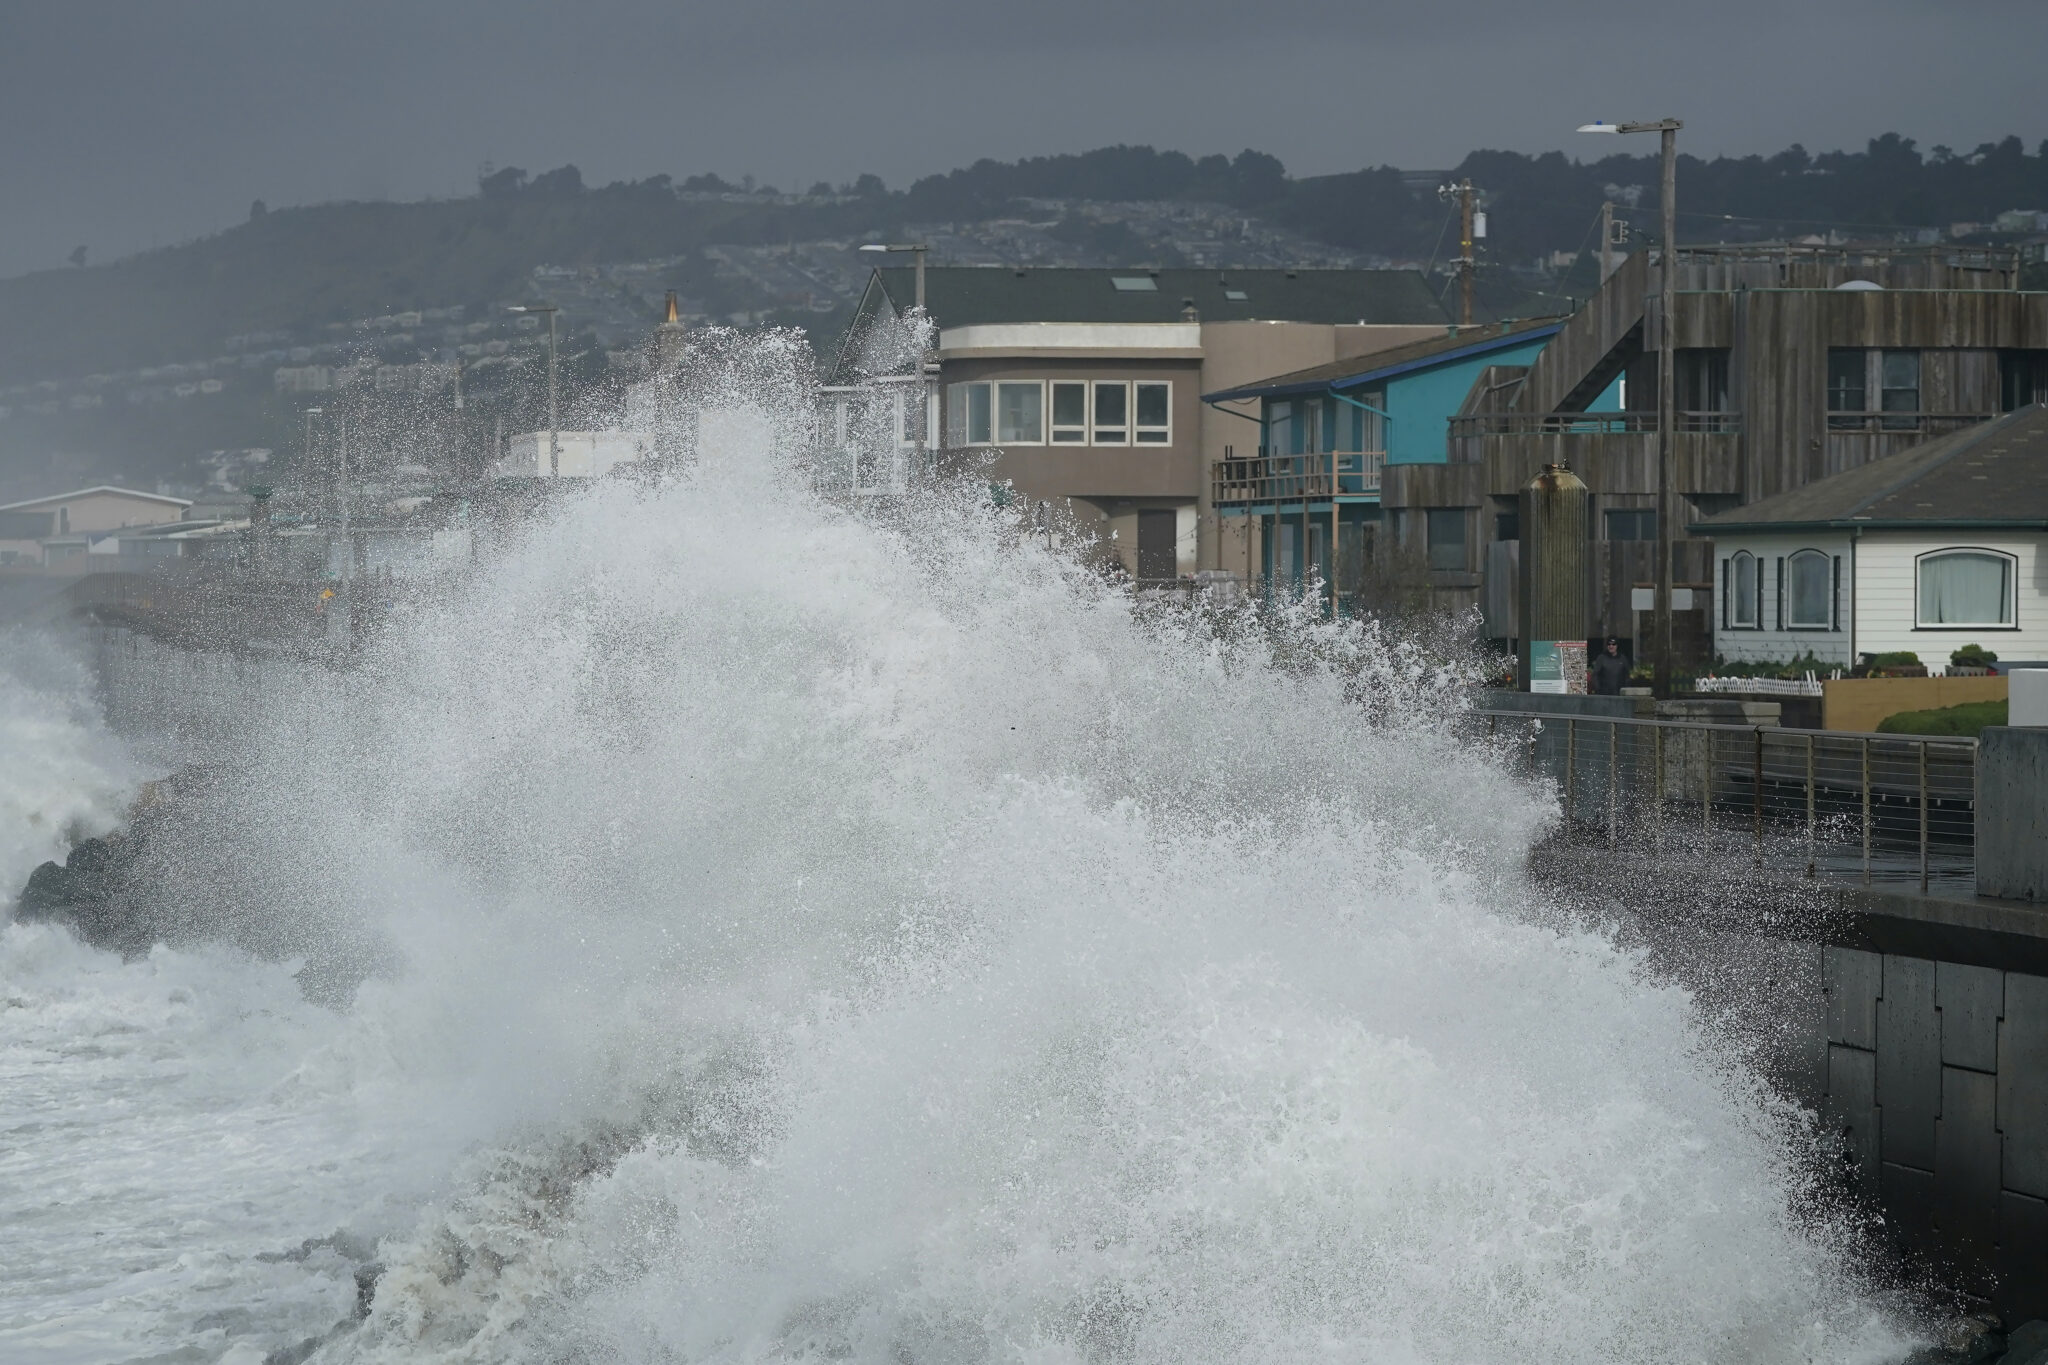 Waves crash into a seawall in Pacifica, Calif., Friday, Jan. 6, 2023. California weather calmed Friday but the lull was expected to be brief as more Pacific storms lined up to blast into the state, where successive powerful weather systems have knocked out power to thousands, battered the coastline, flooded streets, toppled trees and caused at least six deaths. (AP Photo/Jeff Chiu)